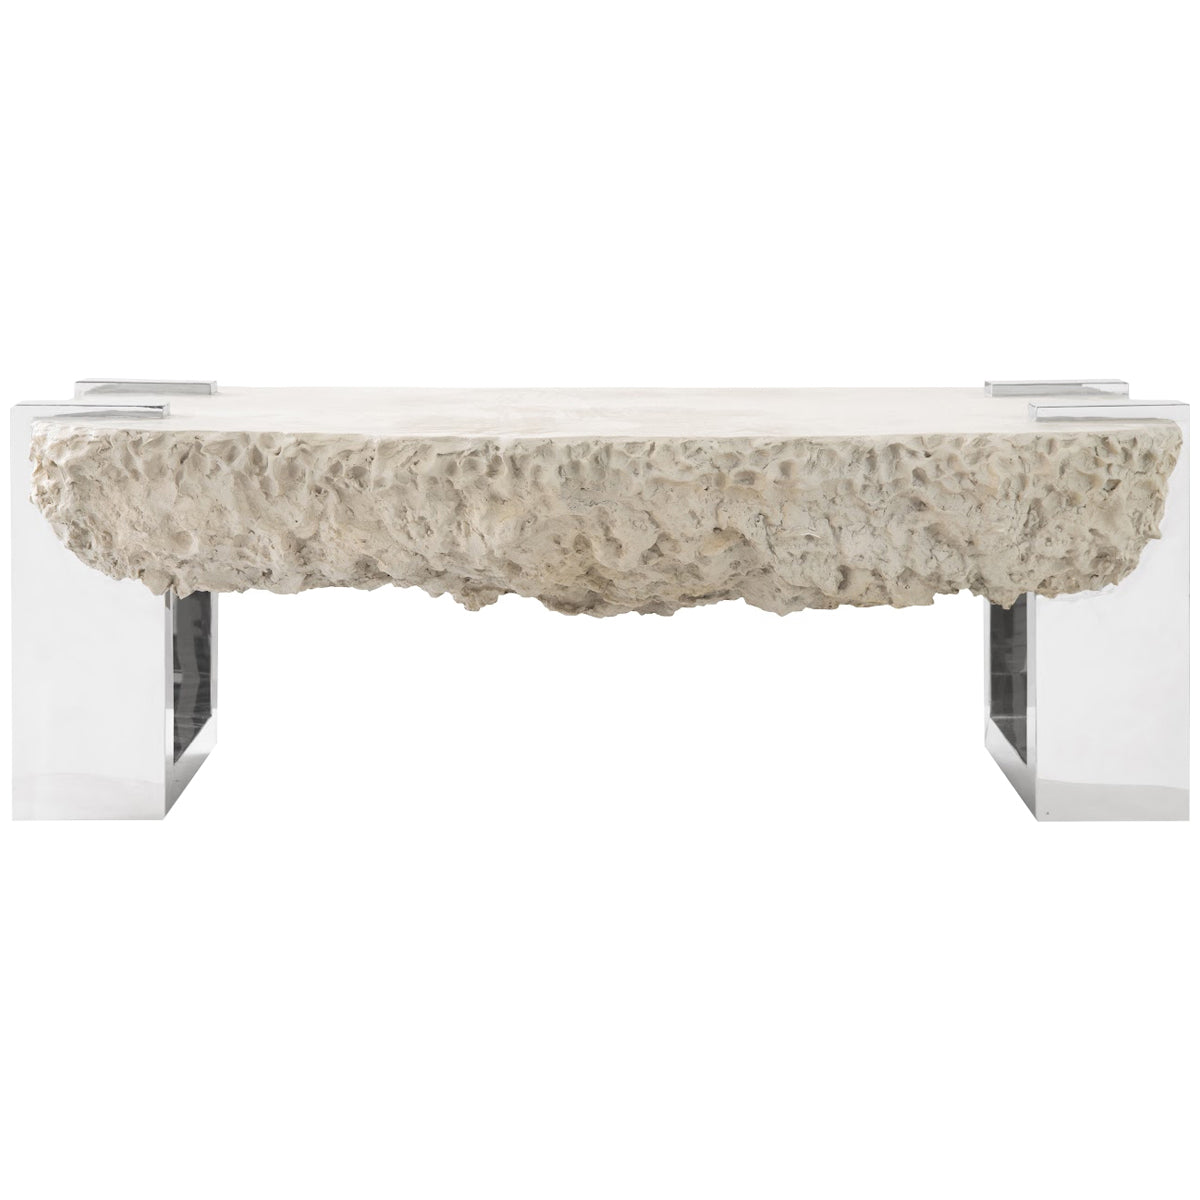 Phillips Collection Negotiation Coffee Table, Ash